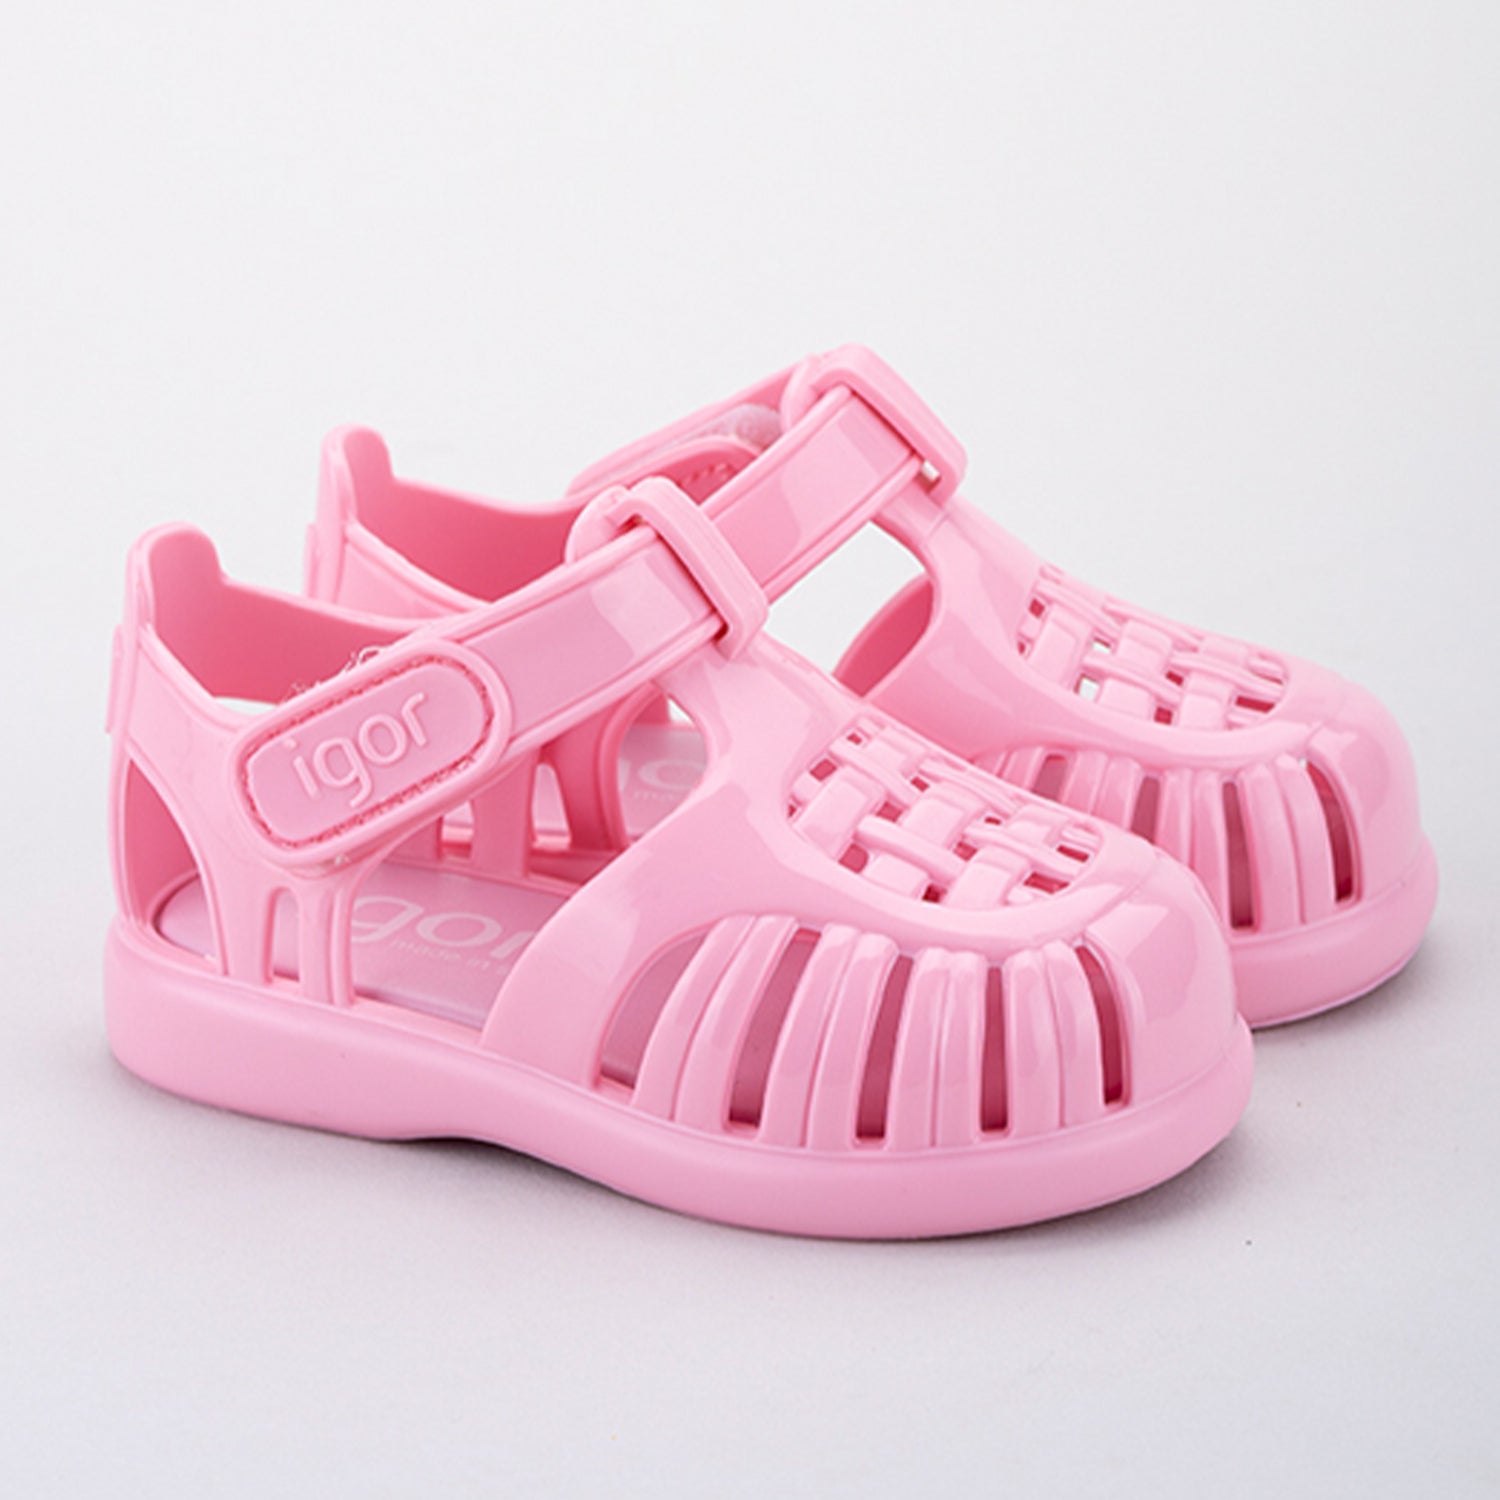 Pale Pink Cage Jellies